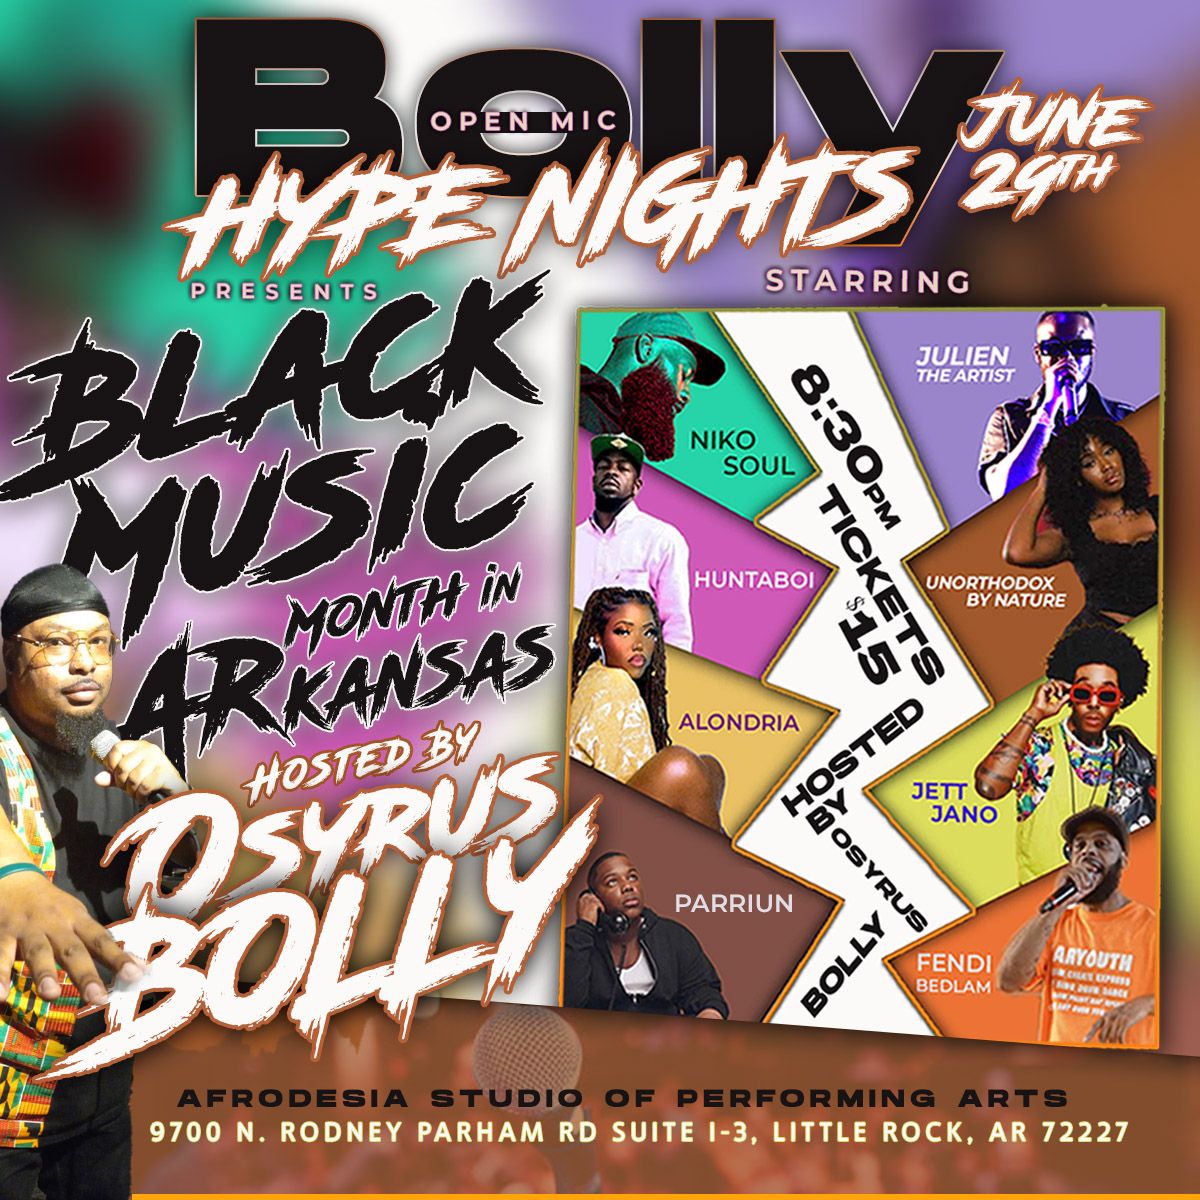 Bolly Open Mic presents Black Music Month in Arkansas